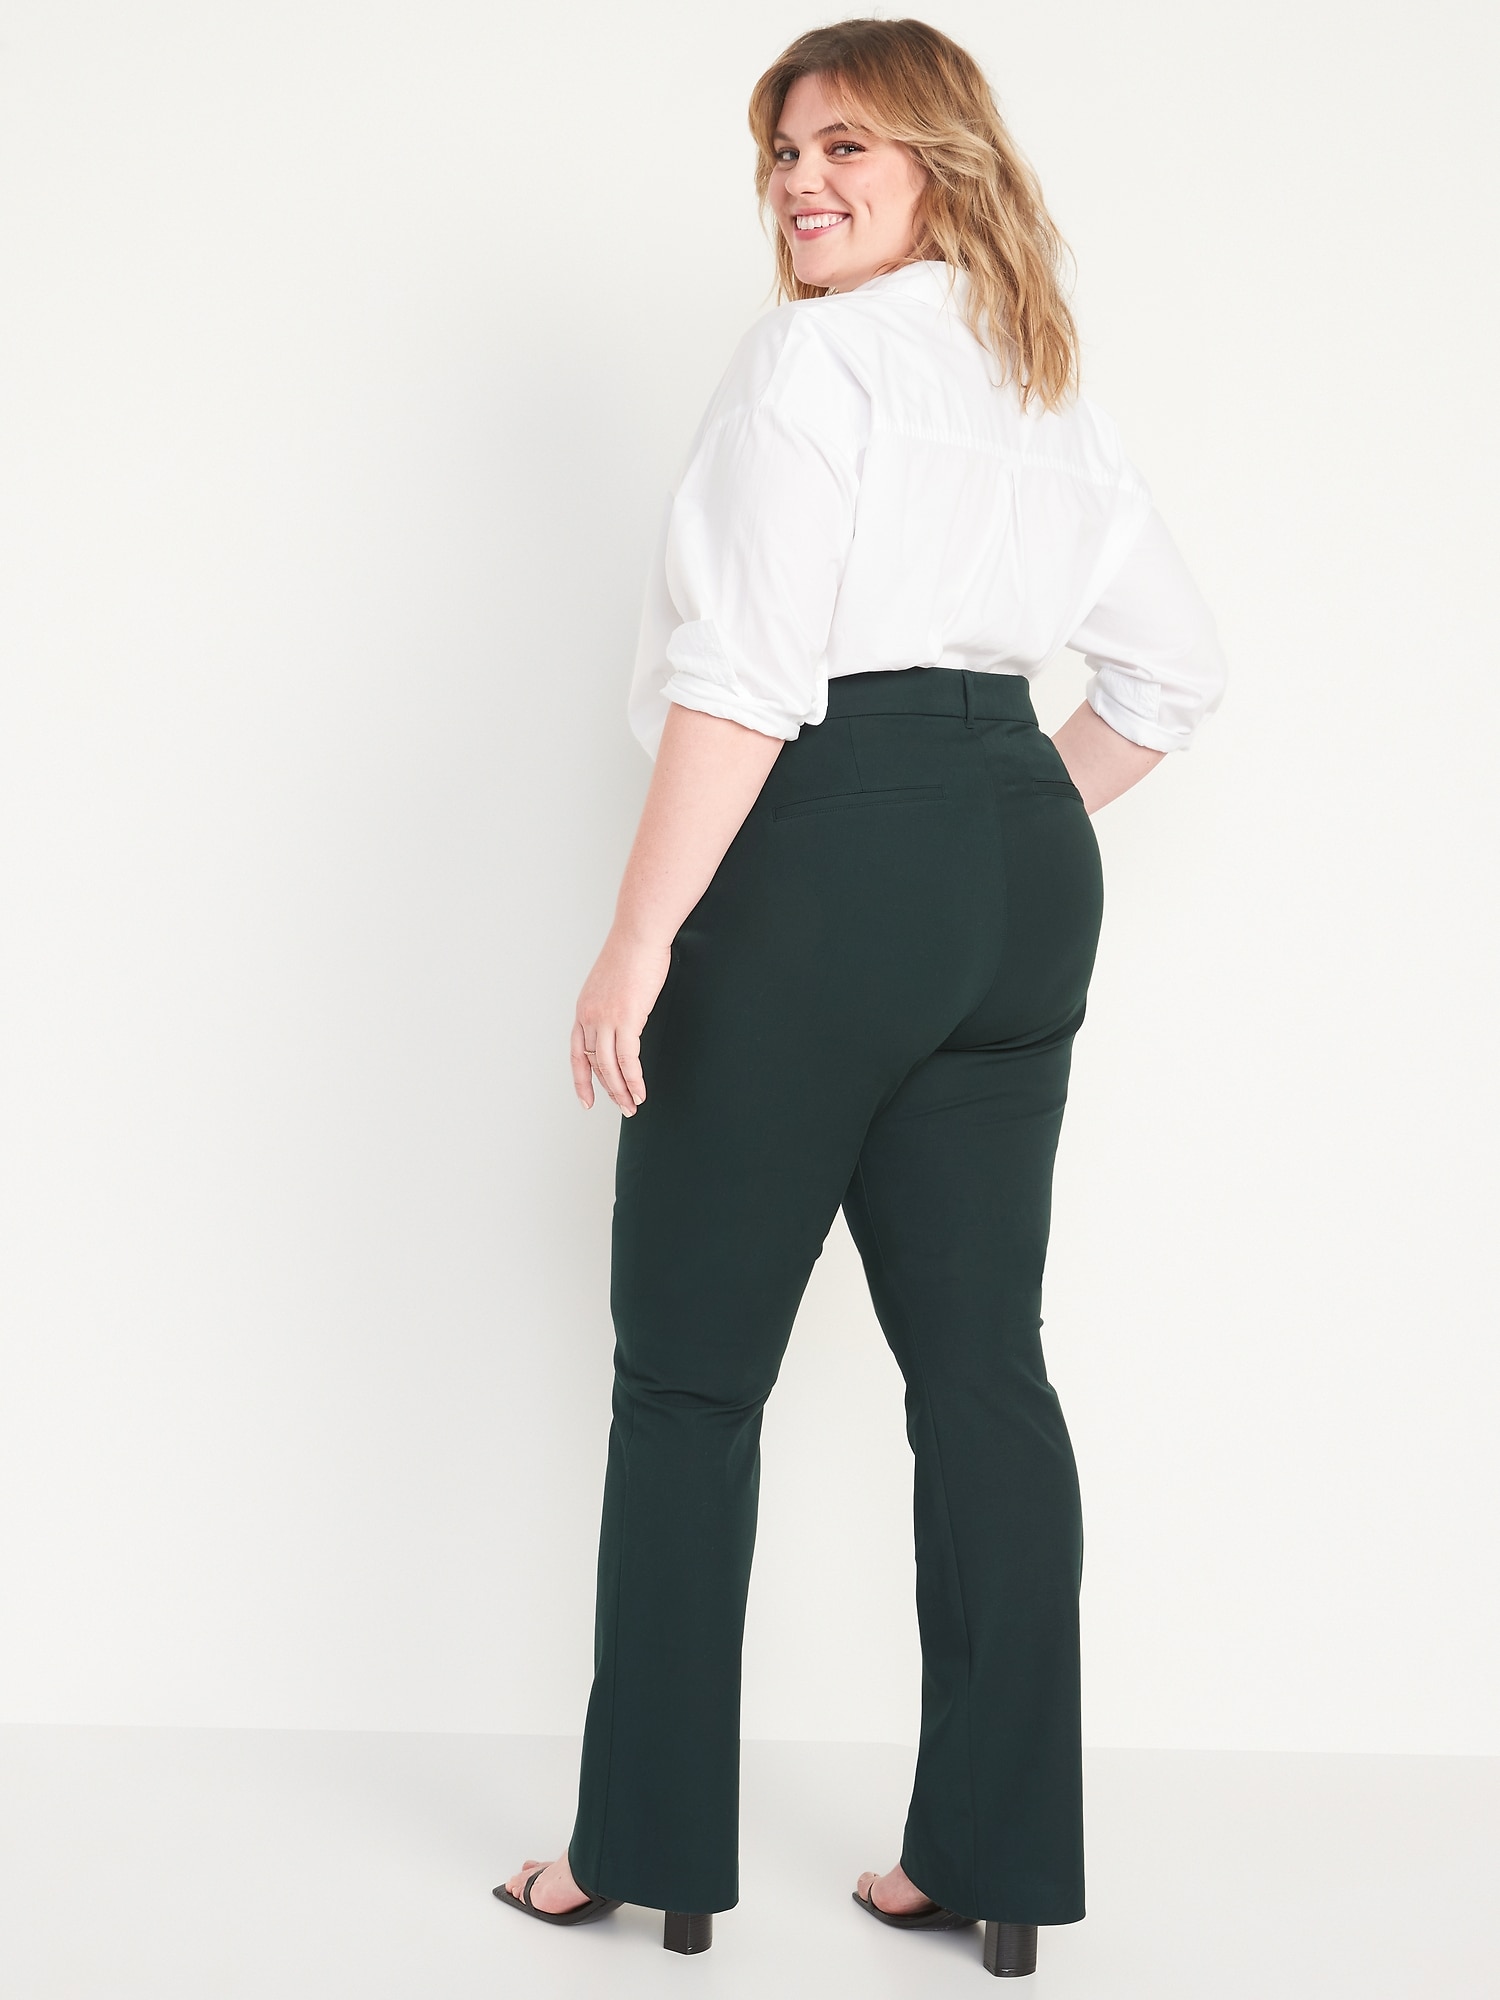 High-Waisted Pixie Flare Pants for Women